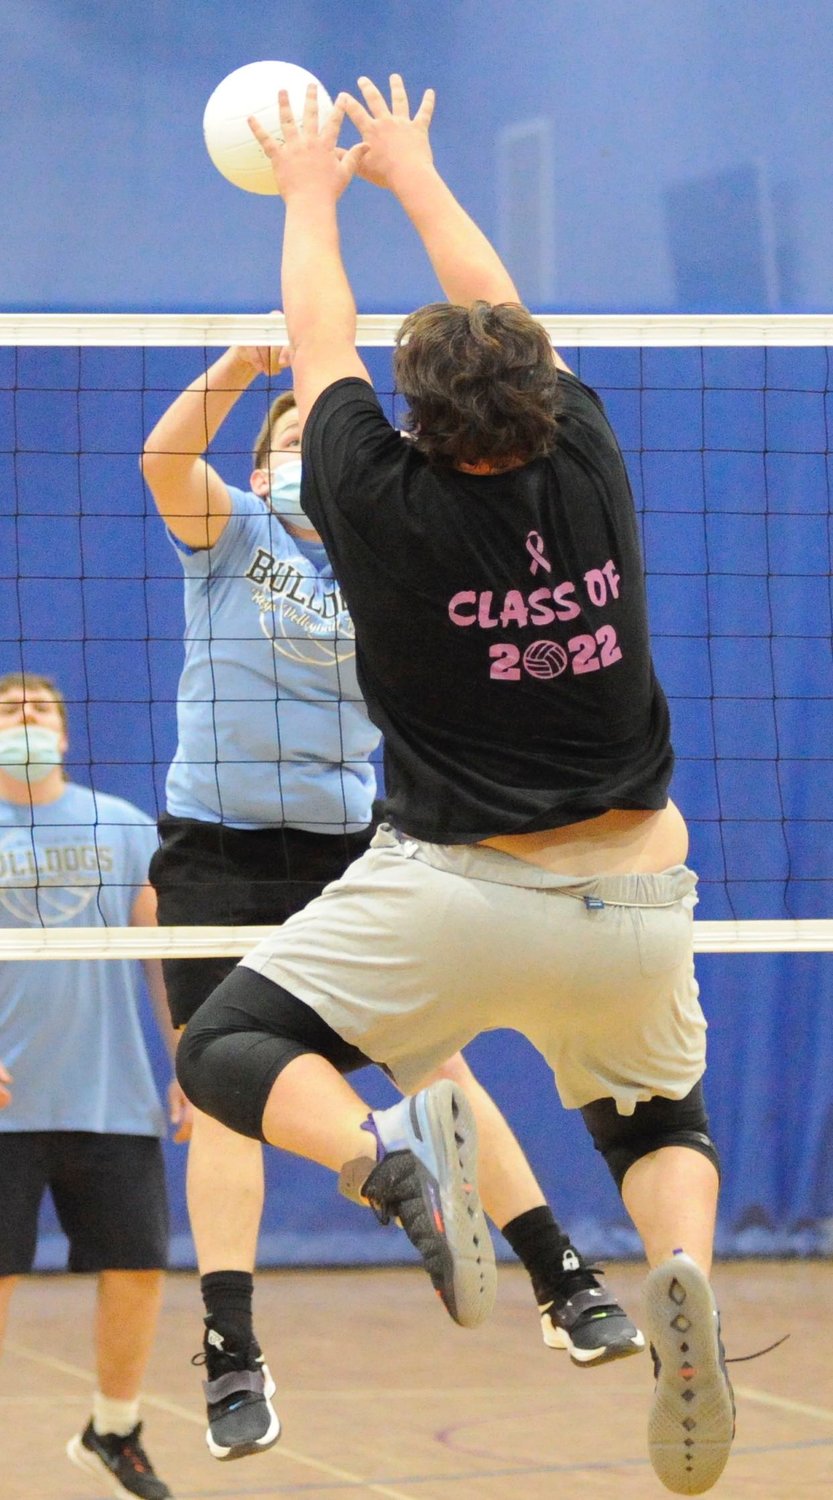 Air time. Sullivan West senior Chris Campanelli takes time off from the gridiron to send one over the net against juniors Max Ebert and Dillan Hanslmaier (in the background).